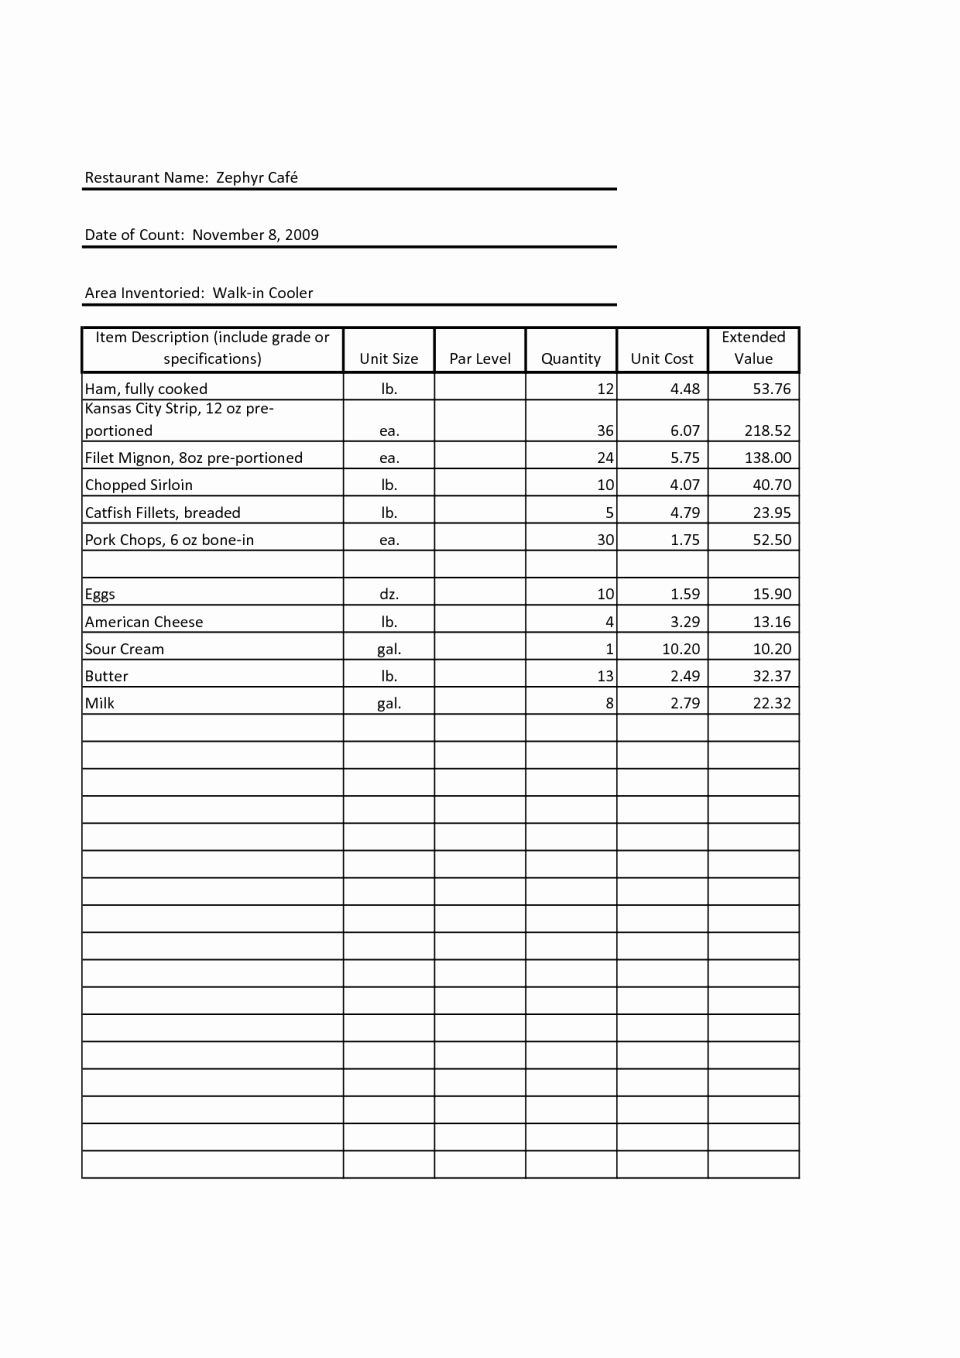 Physical Inventory Count Sheet Template Elegant Inventory form Sample Pdf Spreadsheet Count Sheet Template